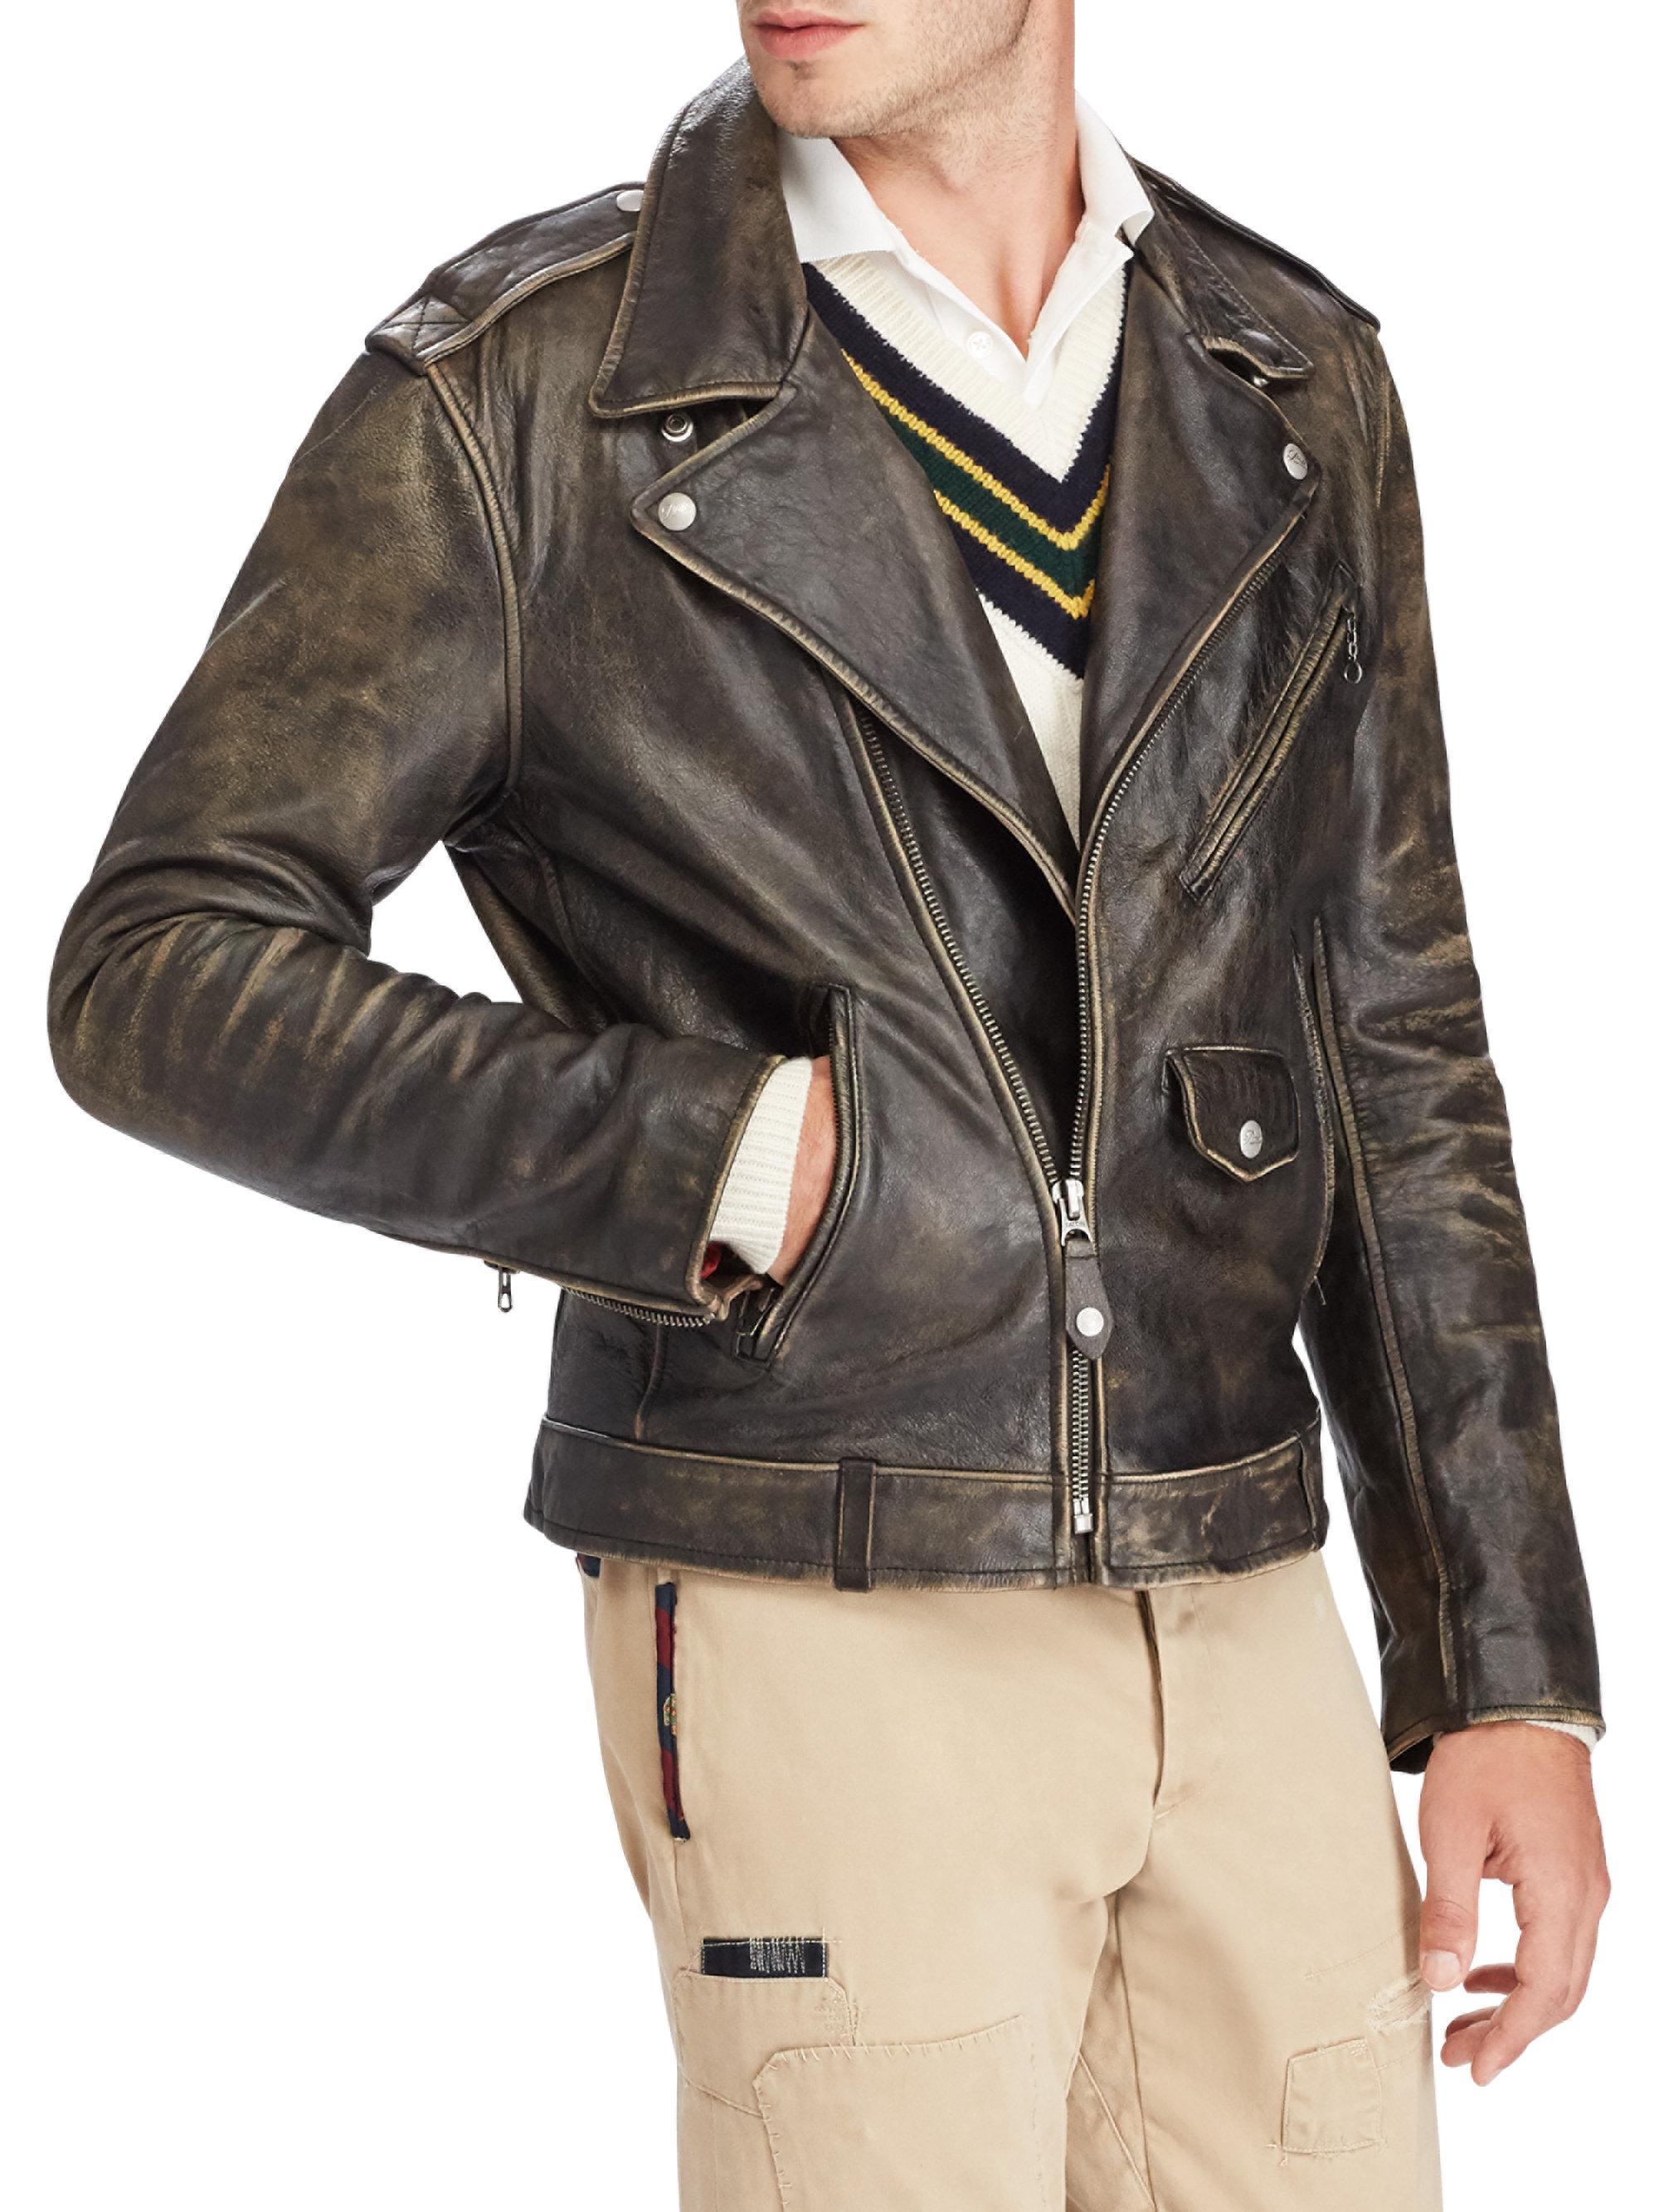 Polo Ralph Lauren The Iconic Leather Motorcycle Jacket in